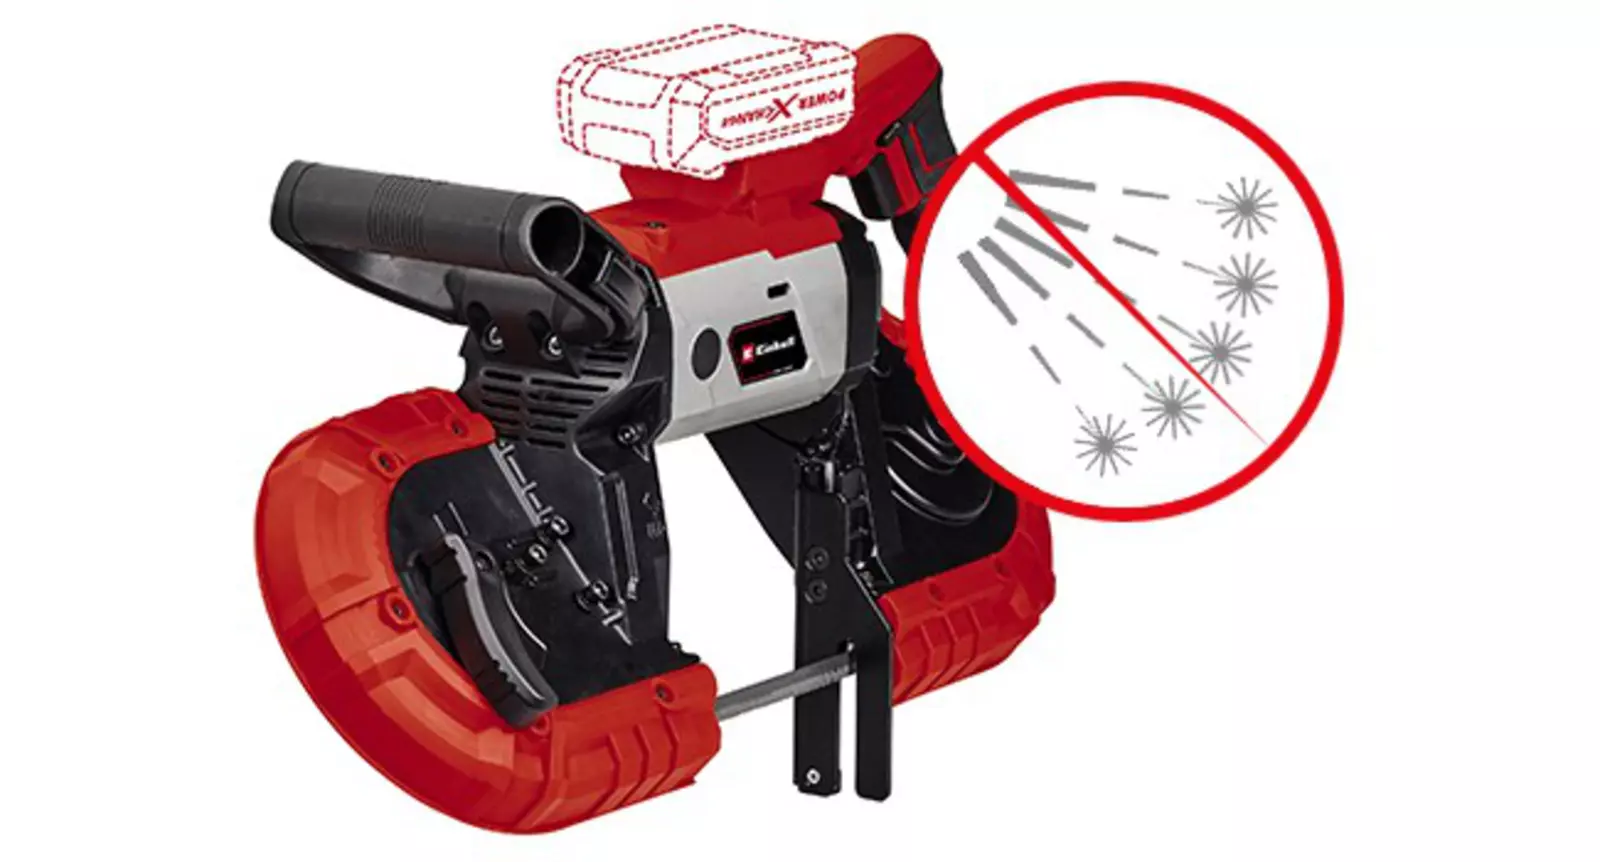 Spark-free-sawing